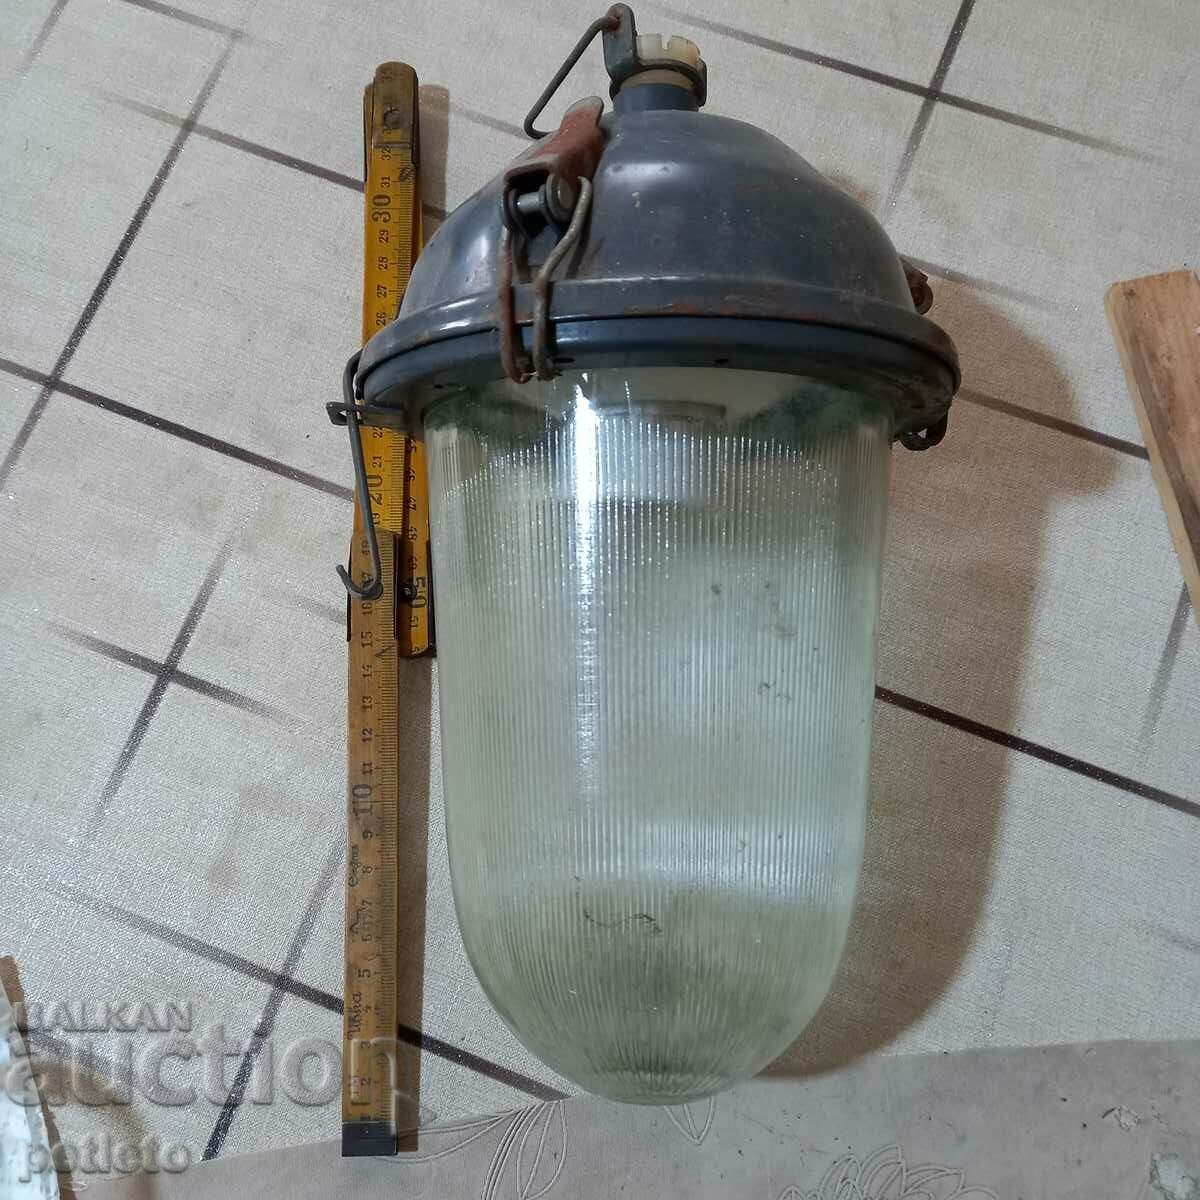 Old industrial lamp